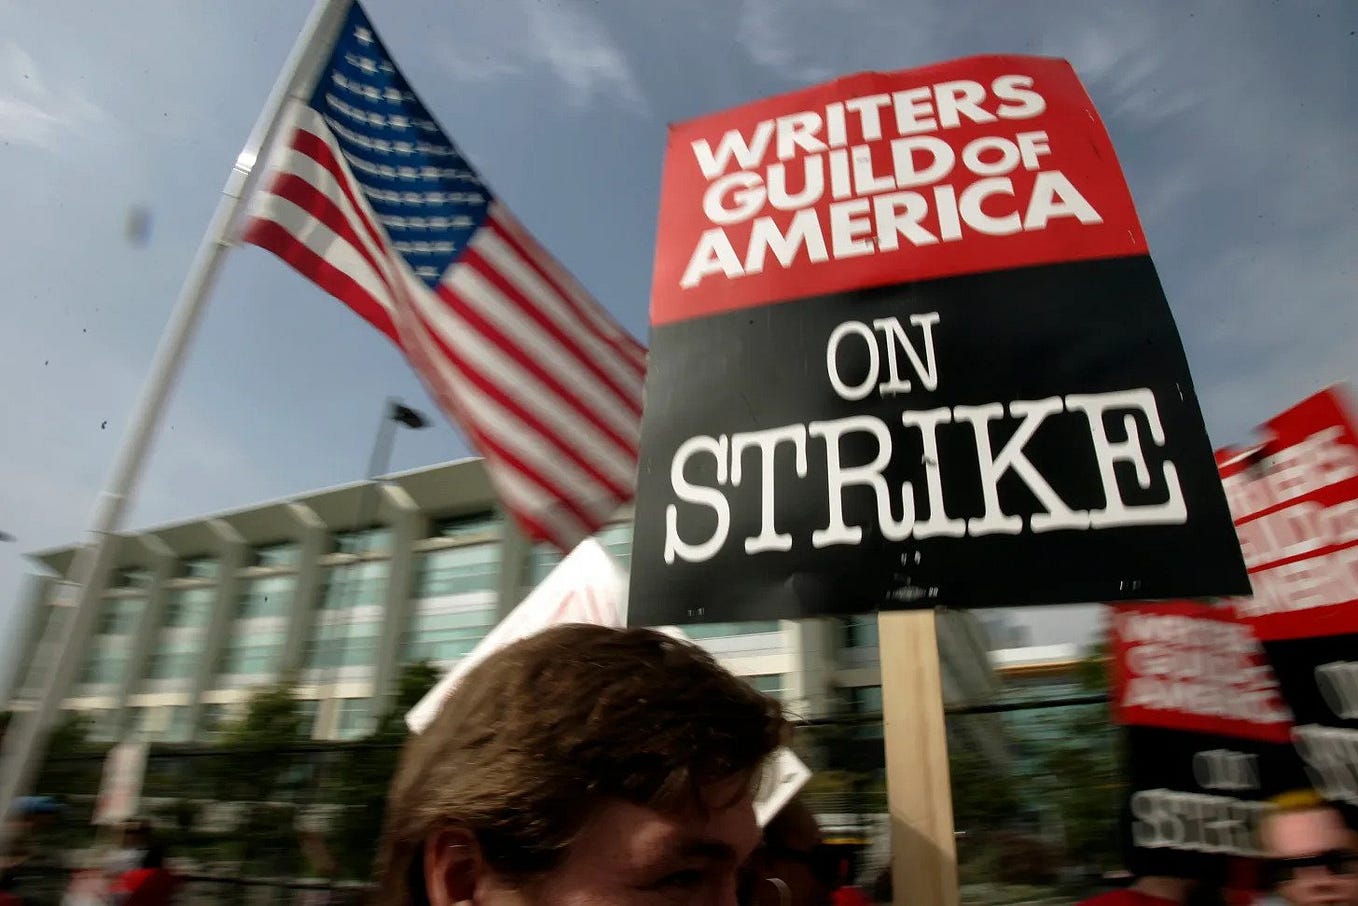 Some Thoughts On The Writer’s Strike